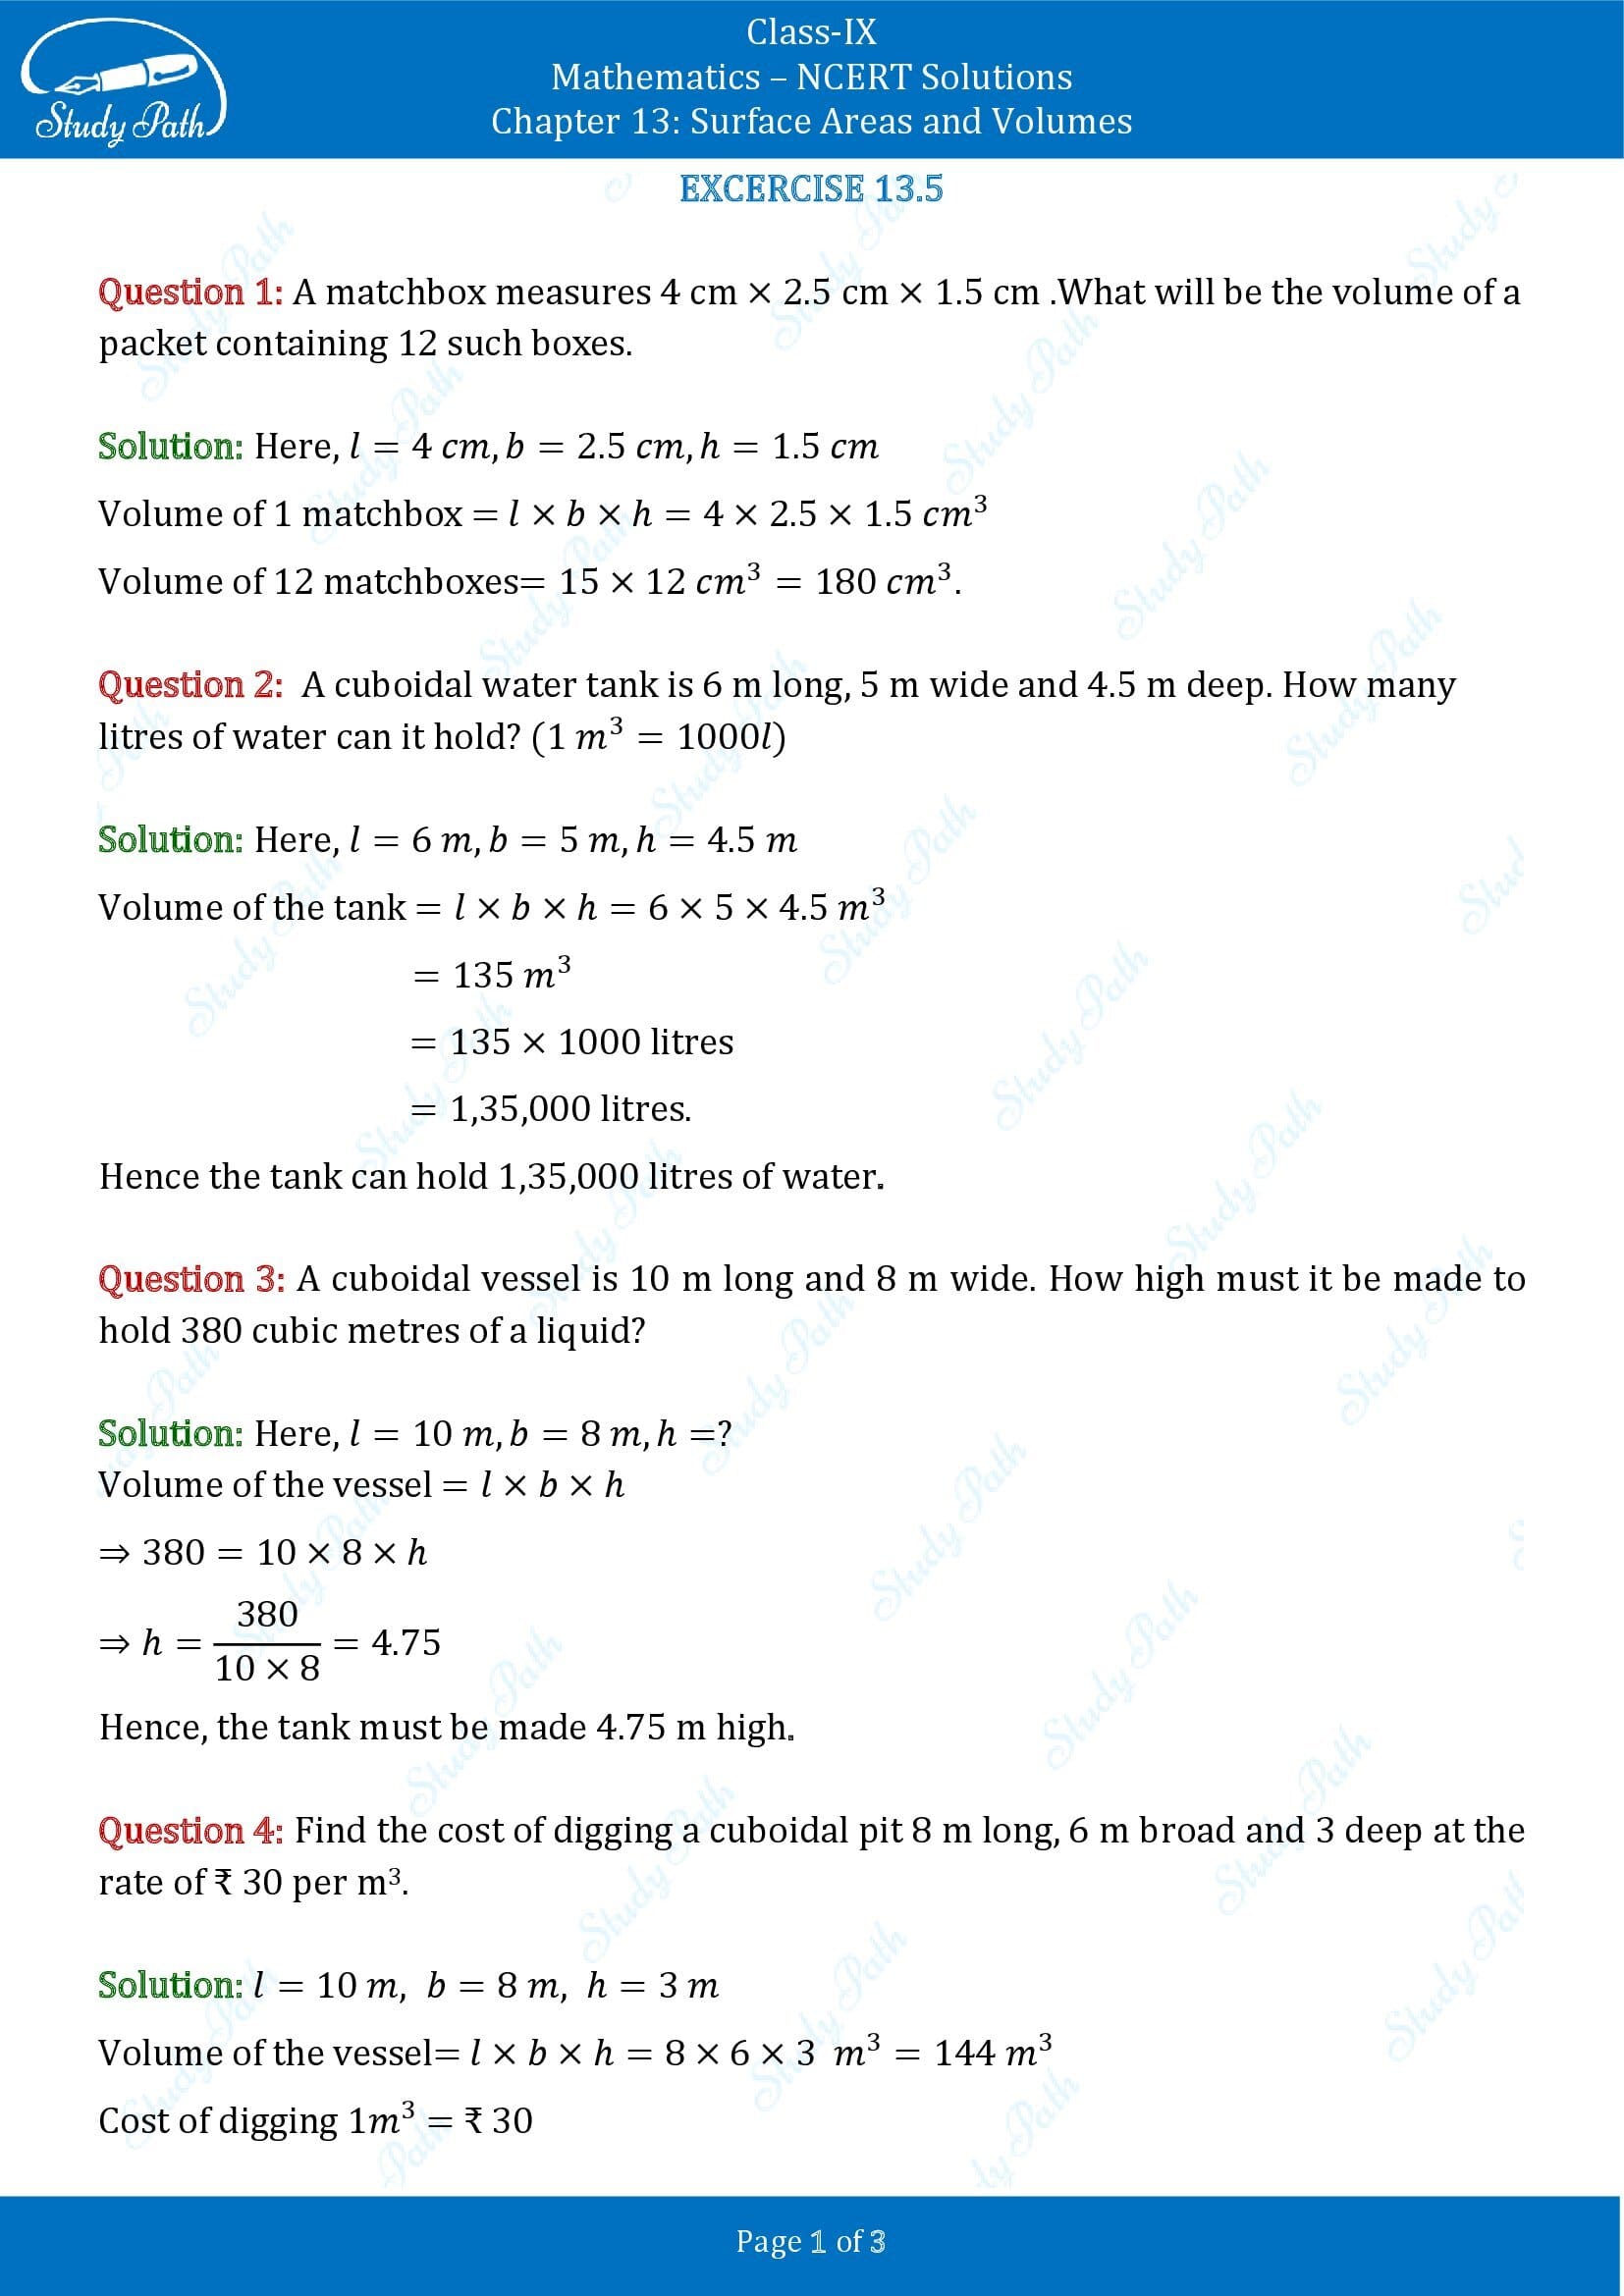 NCERT Solutions for Class 9 Maths Chapter 13 Surface Areas and Volumes Exercise 13.5 00001